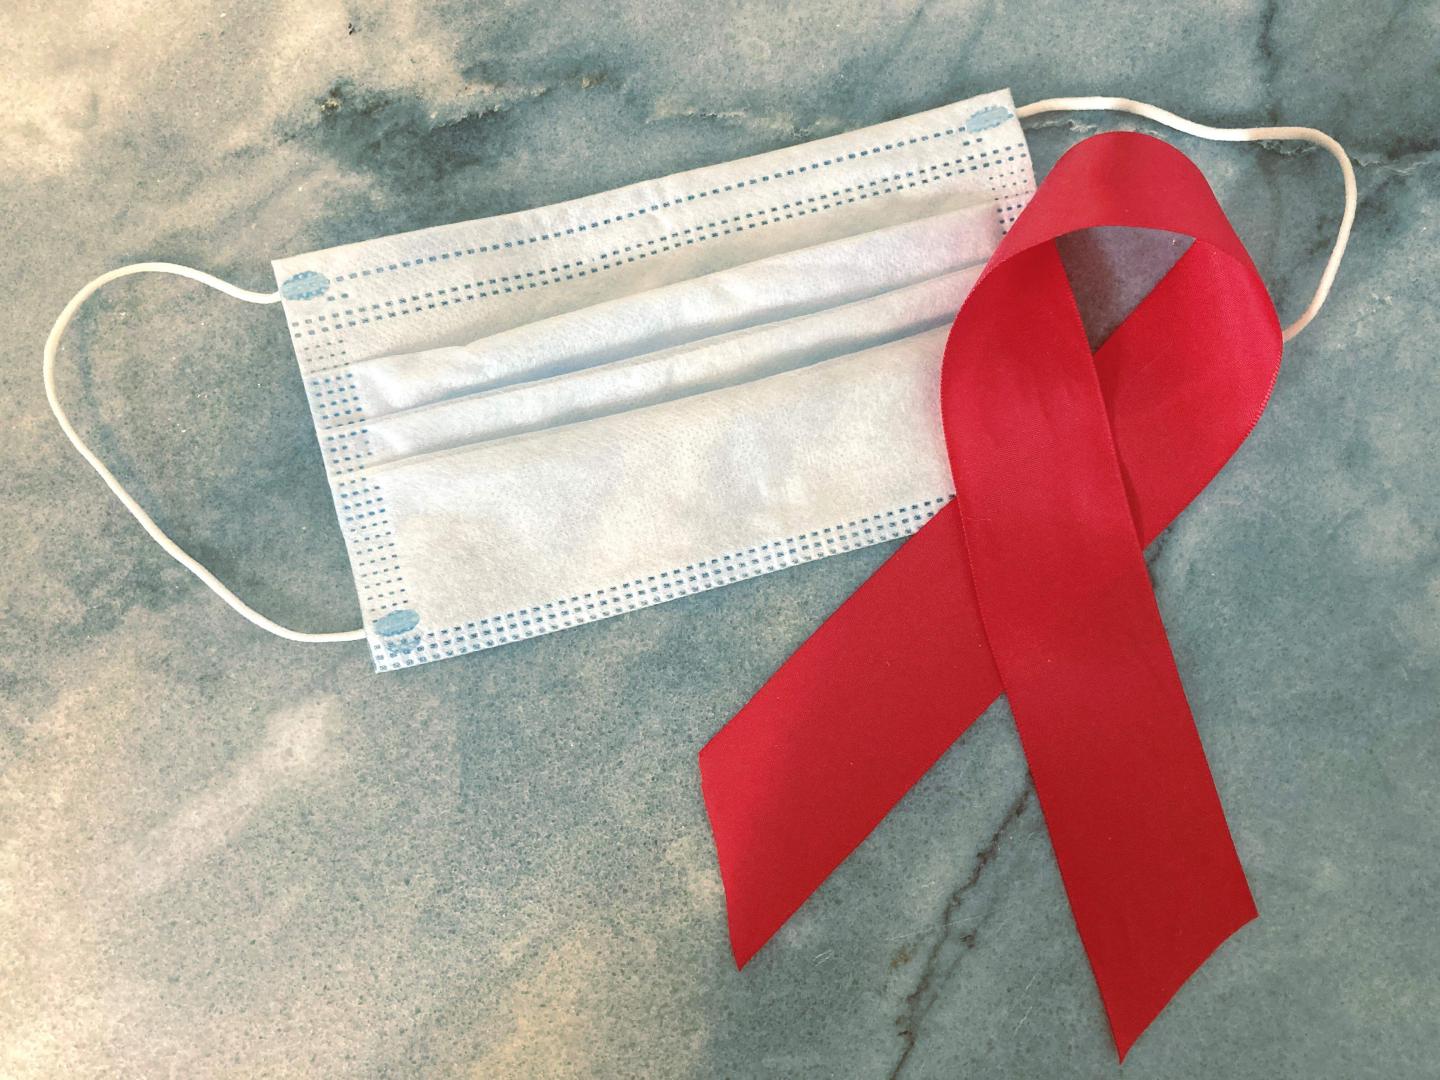 A surgical mask and an HIV/AIDS awareness ribbon.